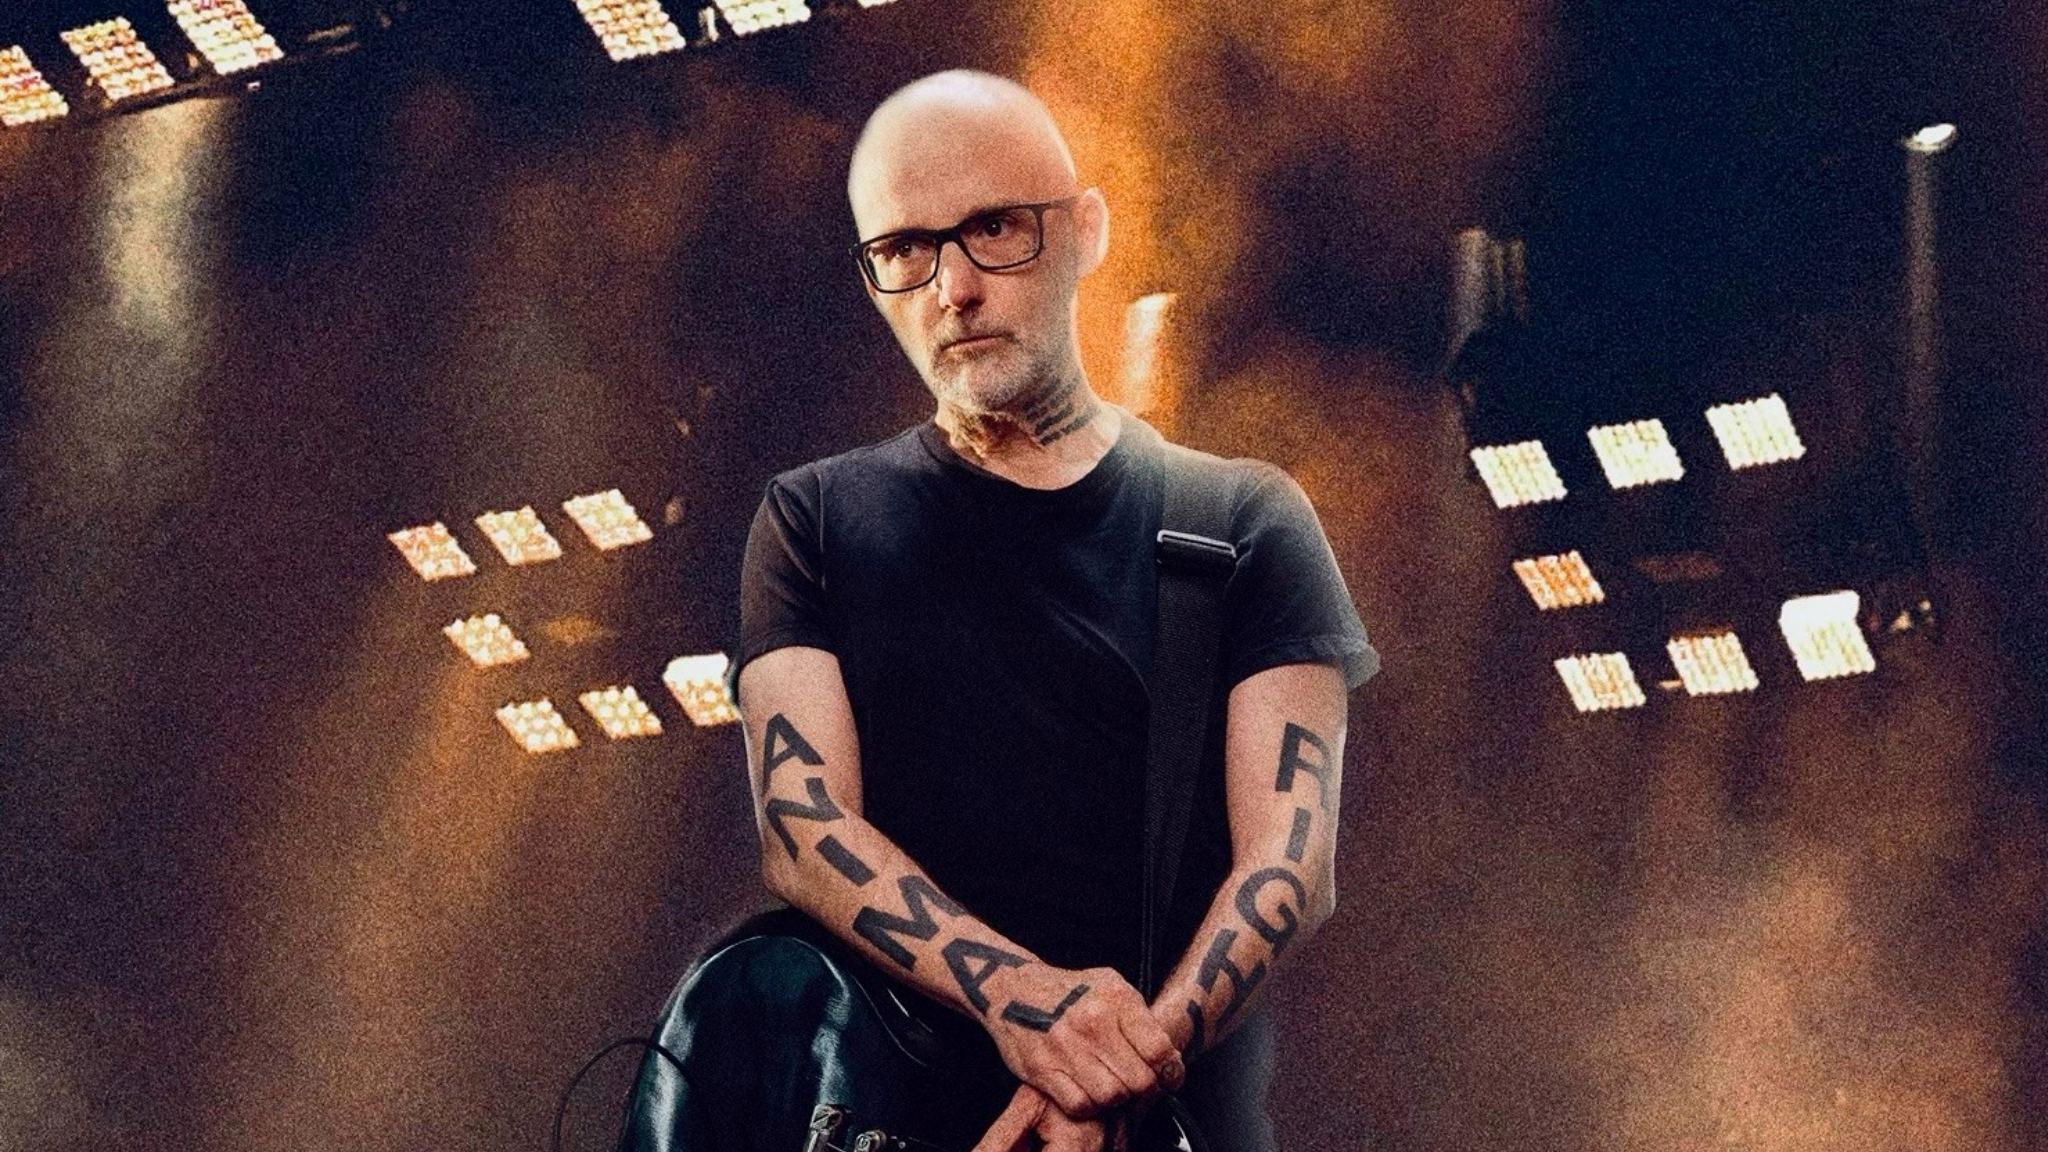 Moby in Manchester promo photo for Mastercard presale offer code